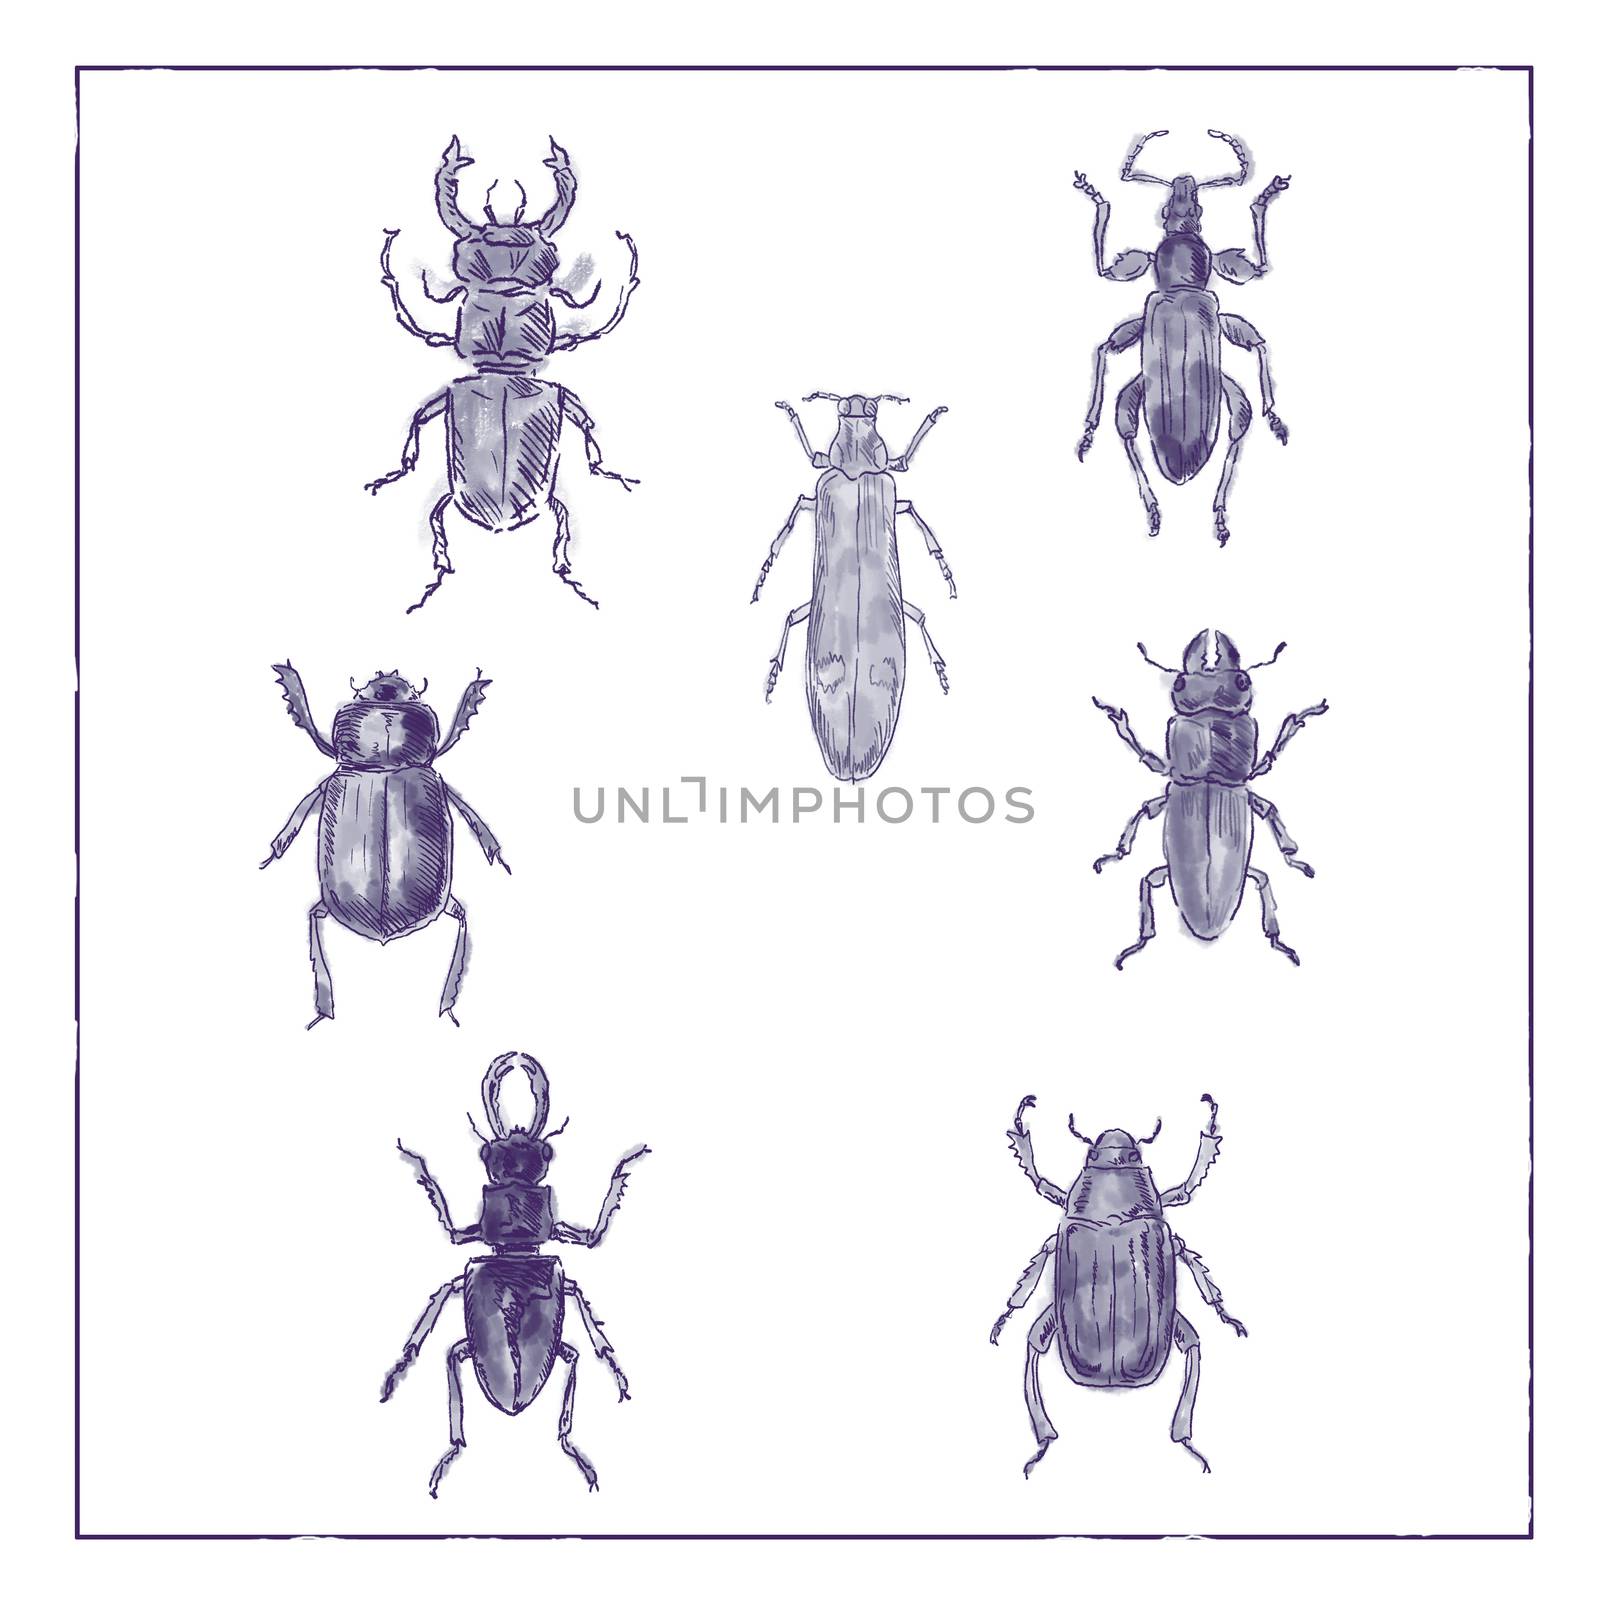 Vintage Victorian drawing illustration of a collection of Beetle insects like the Beetle, Broad-Nosed Weevil and Buprestis Beetle in duotone on white background.